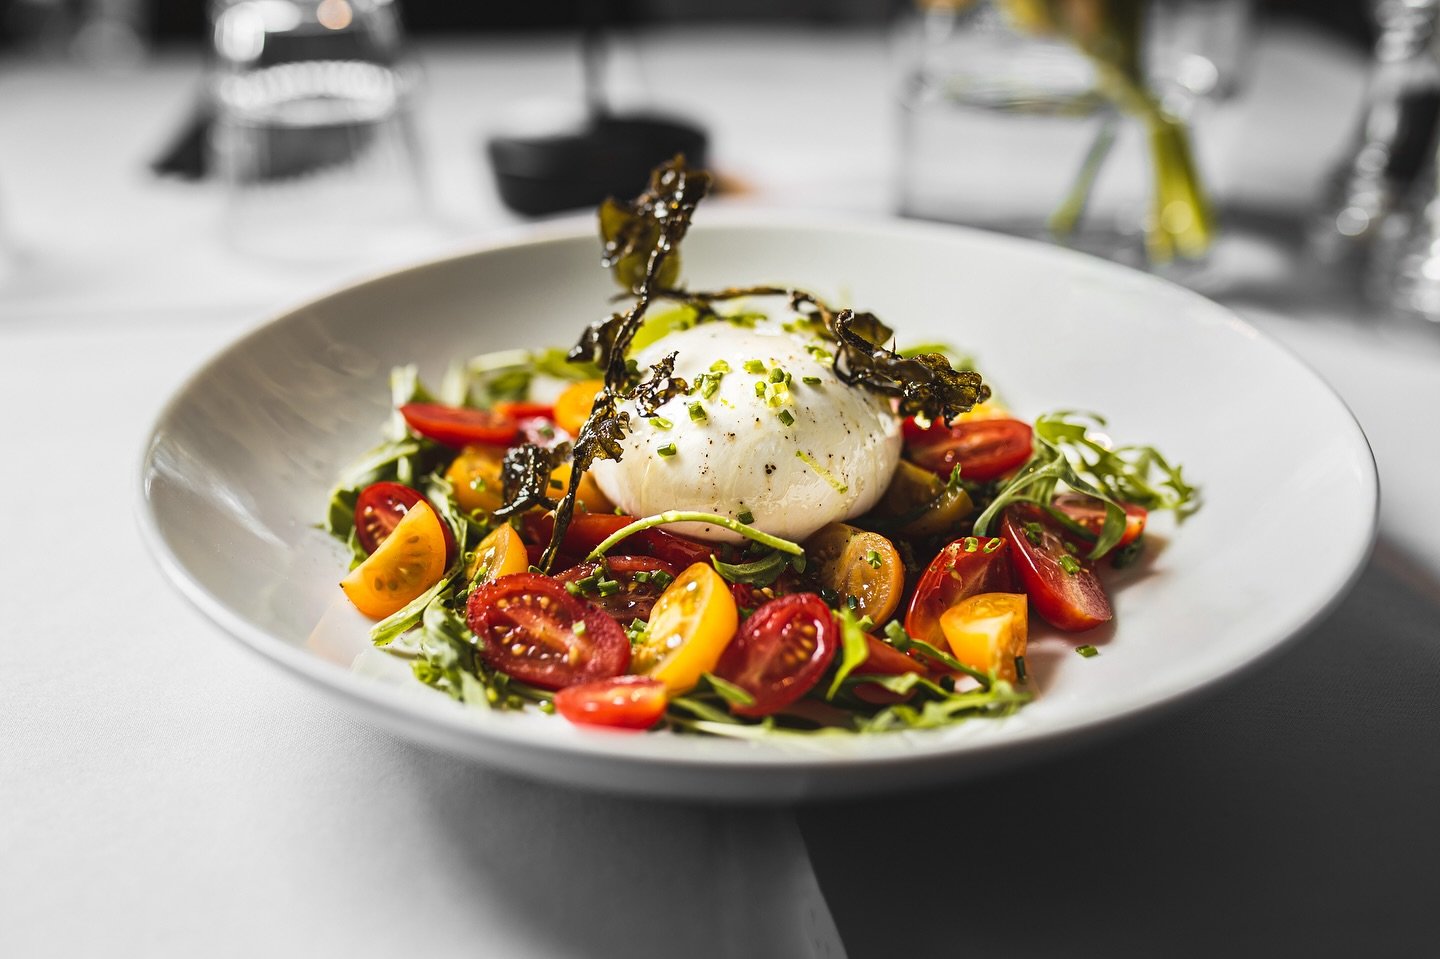 Bright, colourful &amp; bursting with flavour. We work hard to source the freshest ingredients, ensuring quality is met with taste satisfaction 🙌🏽

#samo #samolimassol #burrata #tomatoes #cherrytomatoes #foodies #foodlover #limassol #cyprus #cyprus